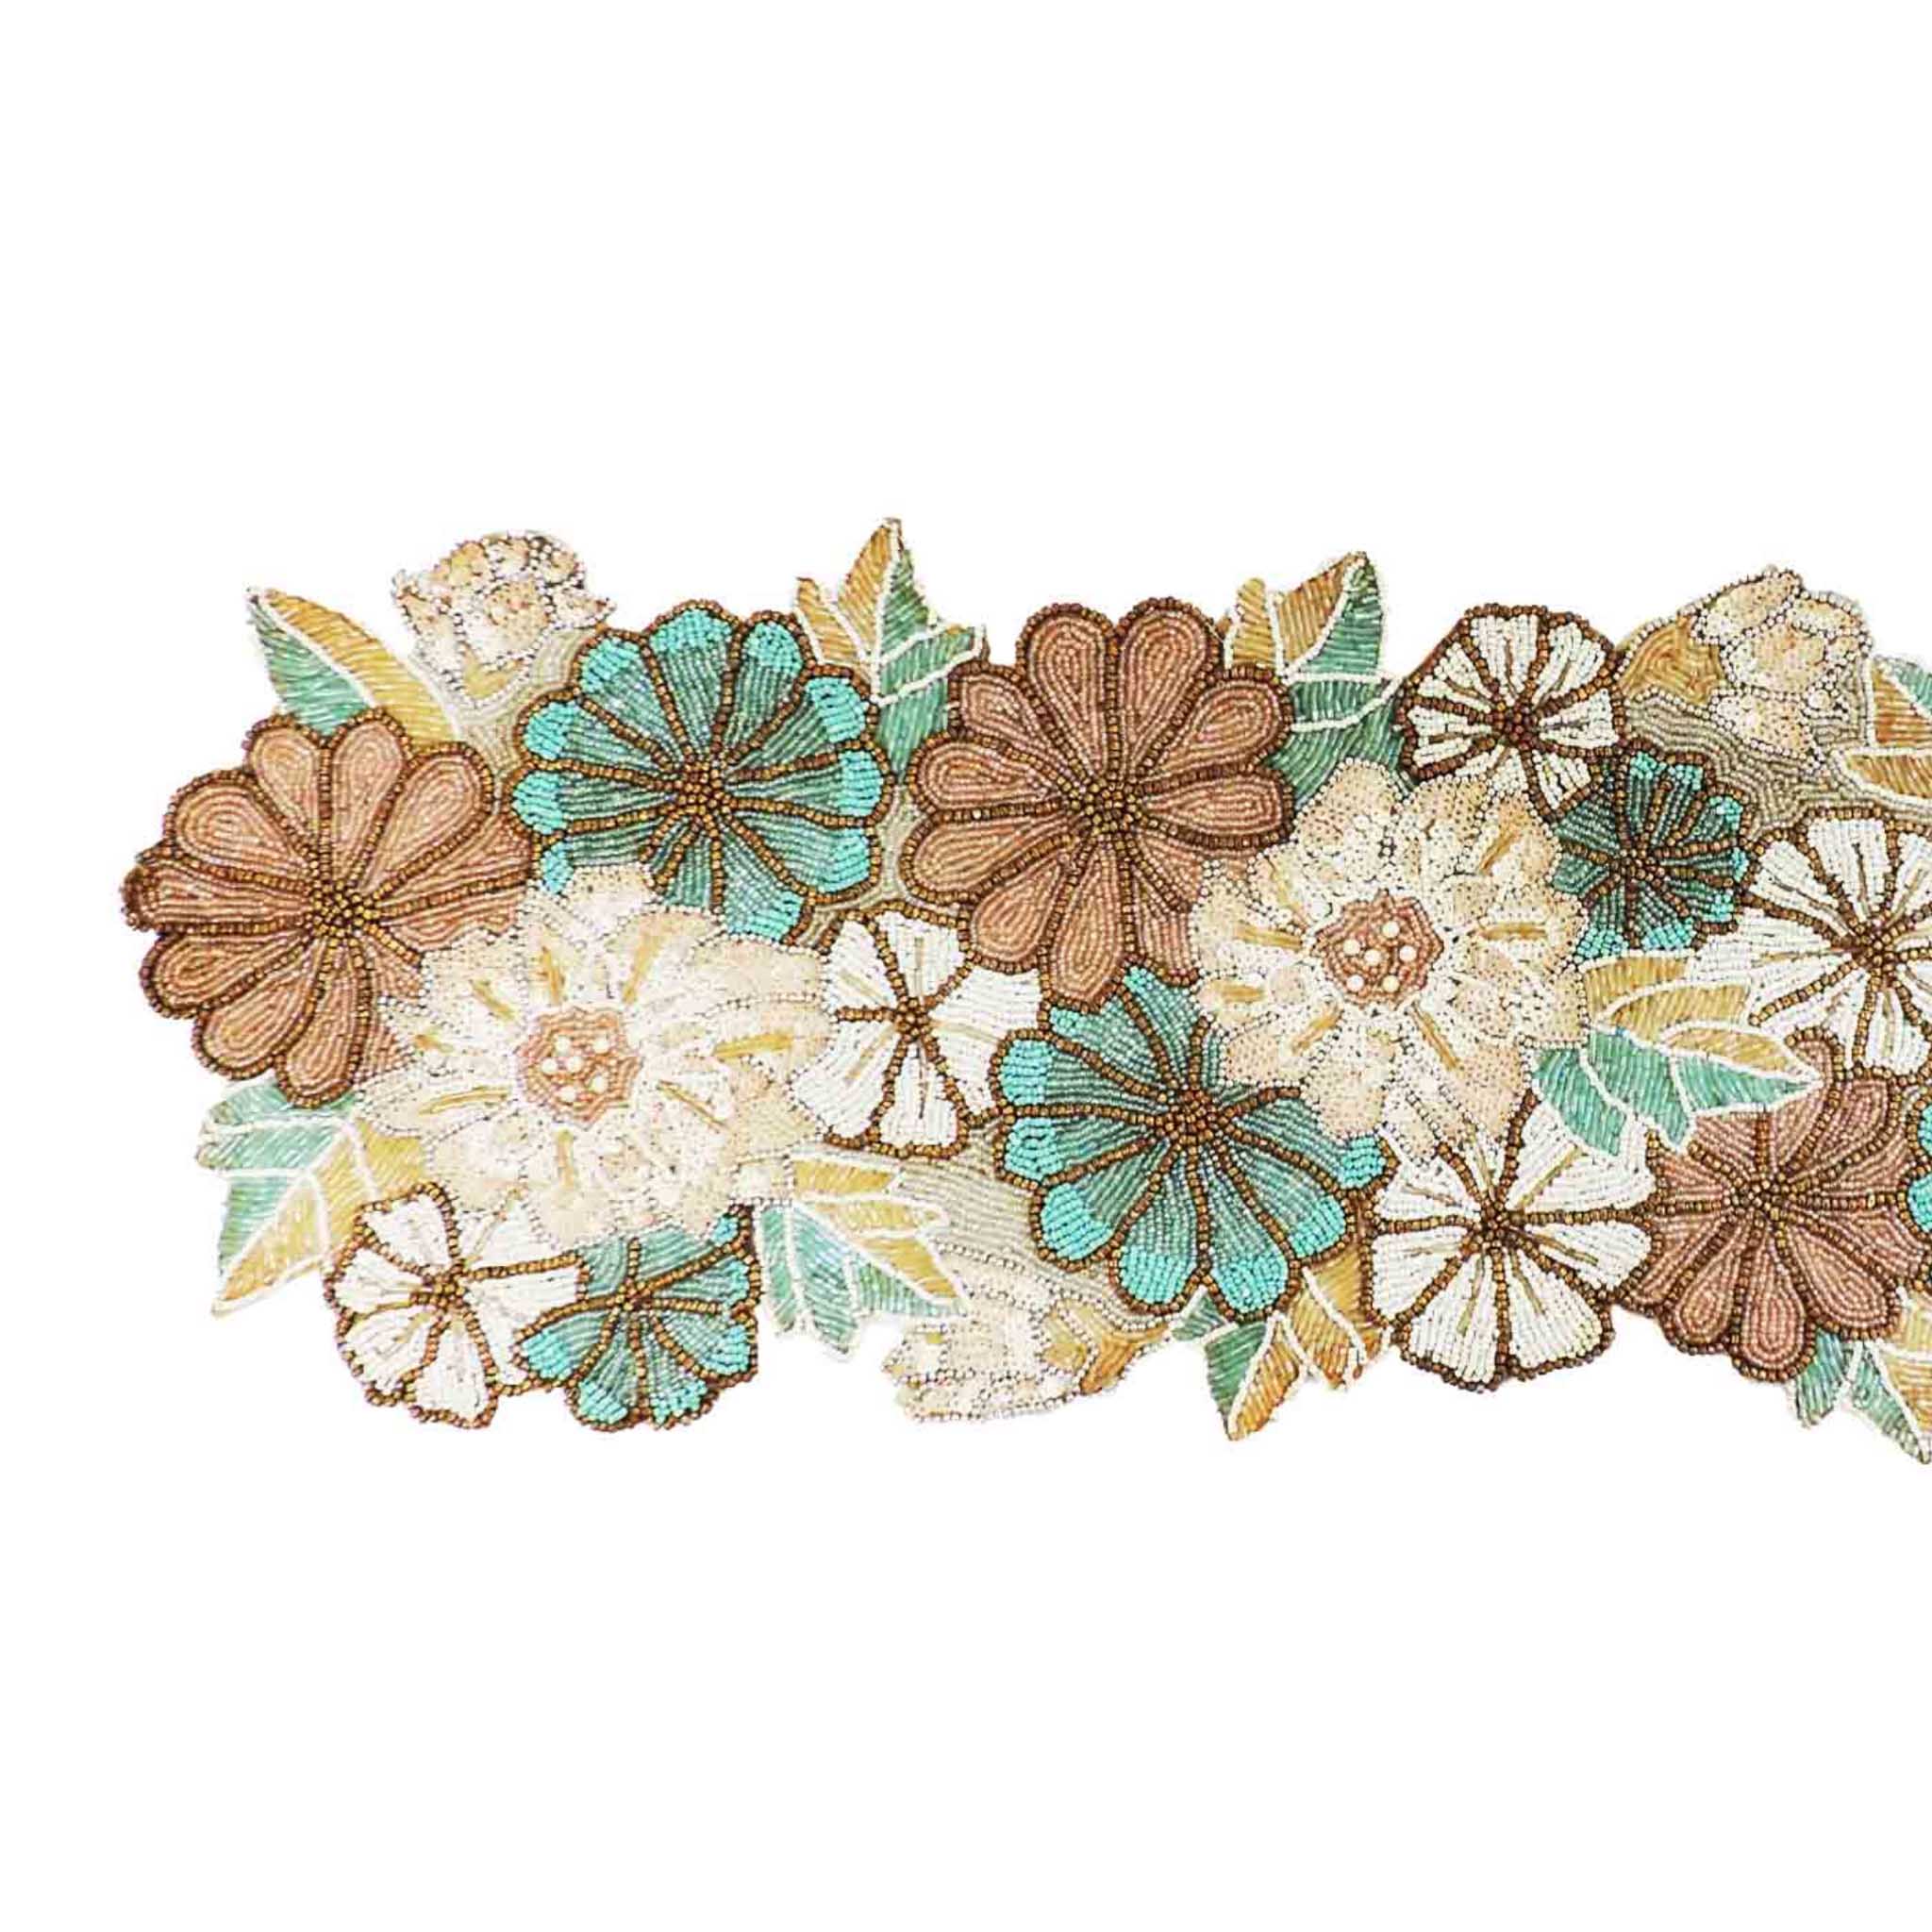 Autumn Blooms Bead Embroidered Table Runner in Teal & Grey